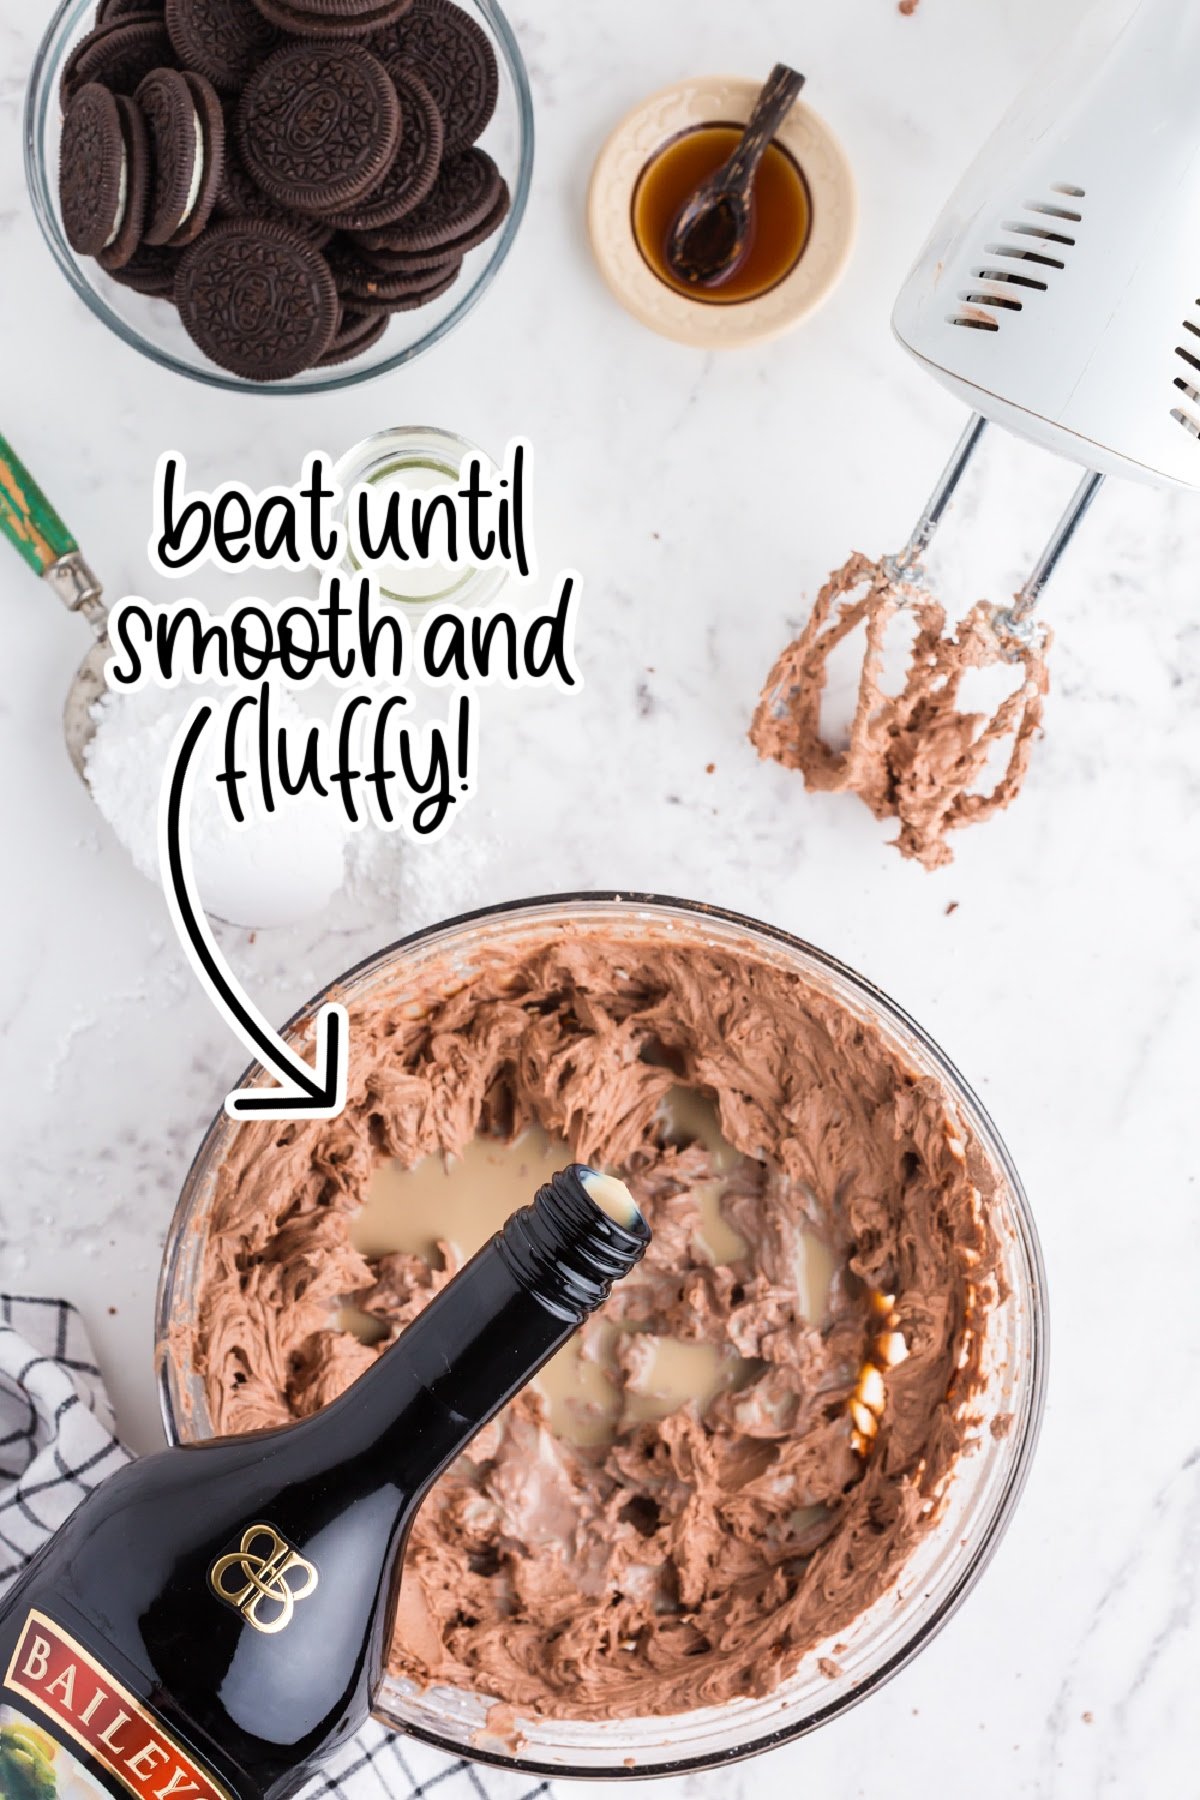 Bailey's being poured into glass mixing bowl with chocolate cheesecake mixture and text "beat until smooth and fluffy."